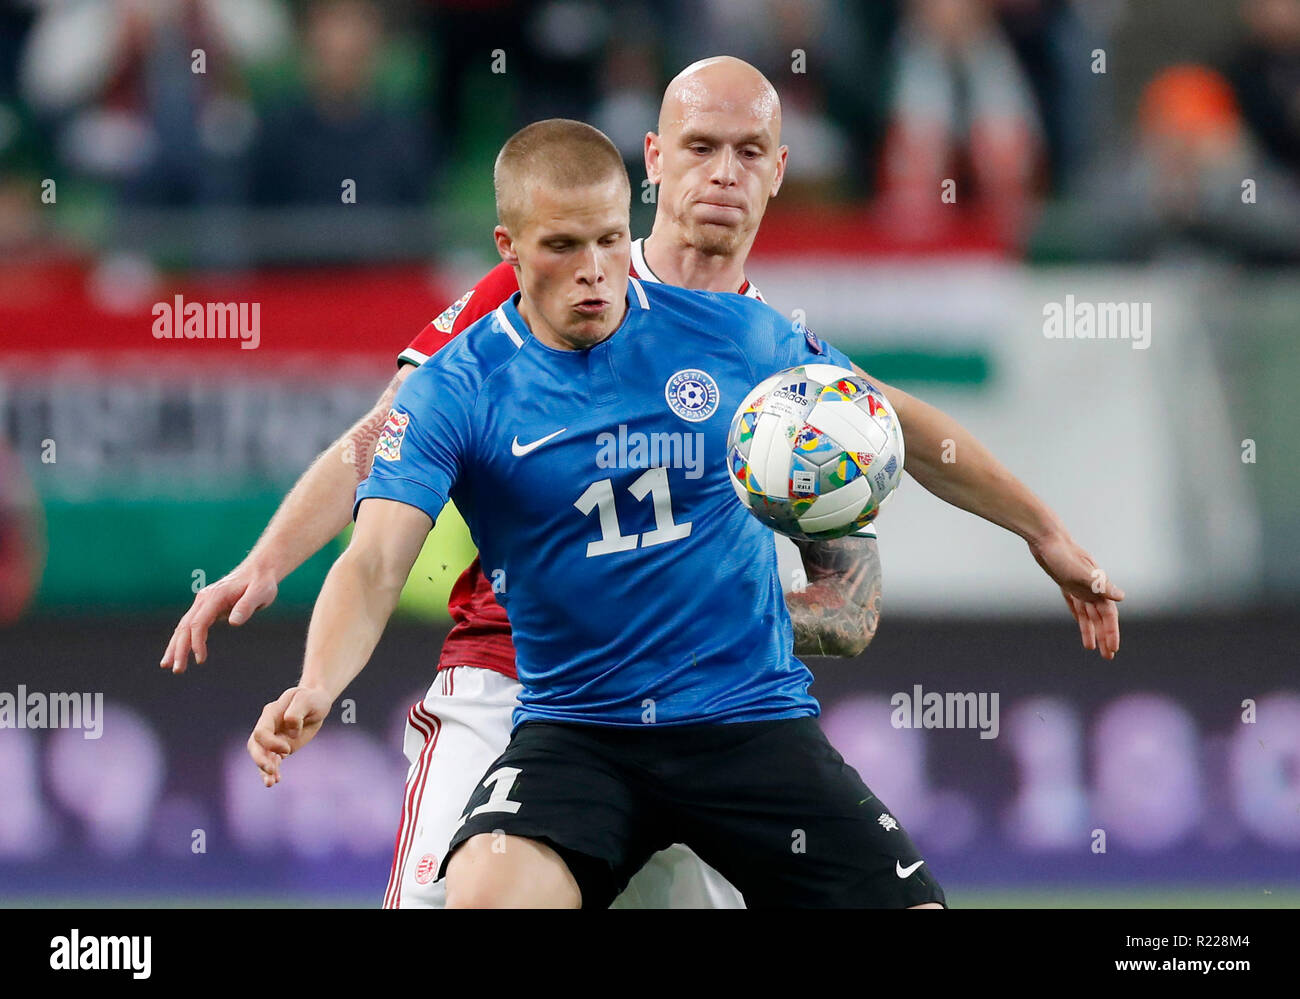 Budapest, Hungary. 15th November, 2018. Henrik Ojamaa of Estonia #11 competes for the ball with Botond Barath of Hungary (r) during the UEFA Nations League group stage match between Hungary and Estonia at Groupama Arena on November 15, 2018 in Budapest, Hungary. Credit: Laszlo Szirtesi/Alamy Live News Stock Photo